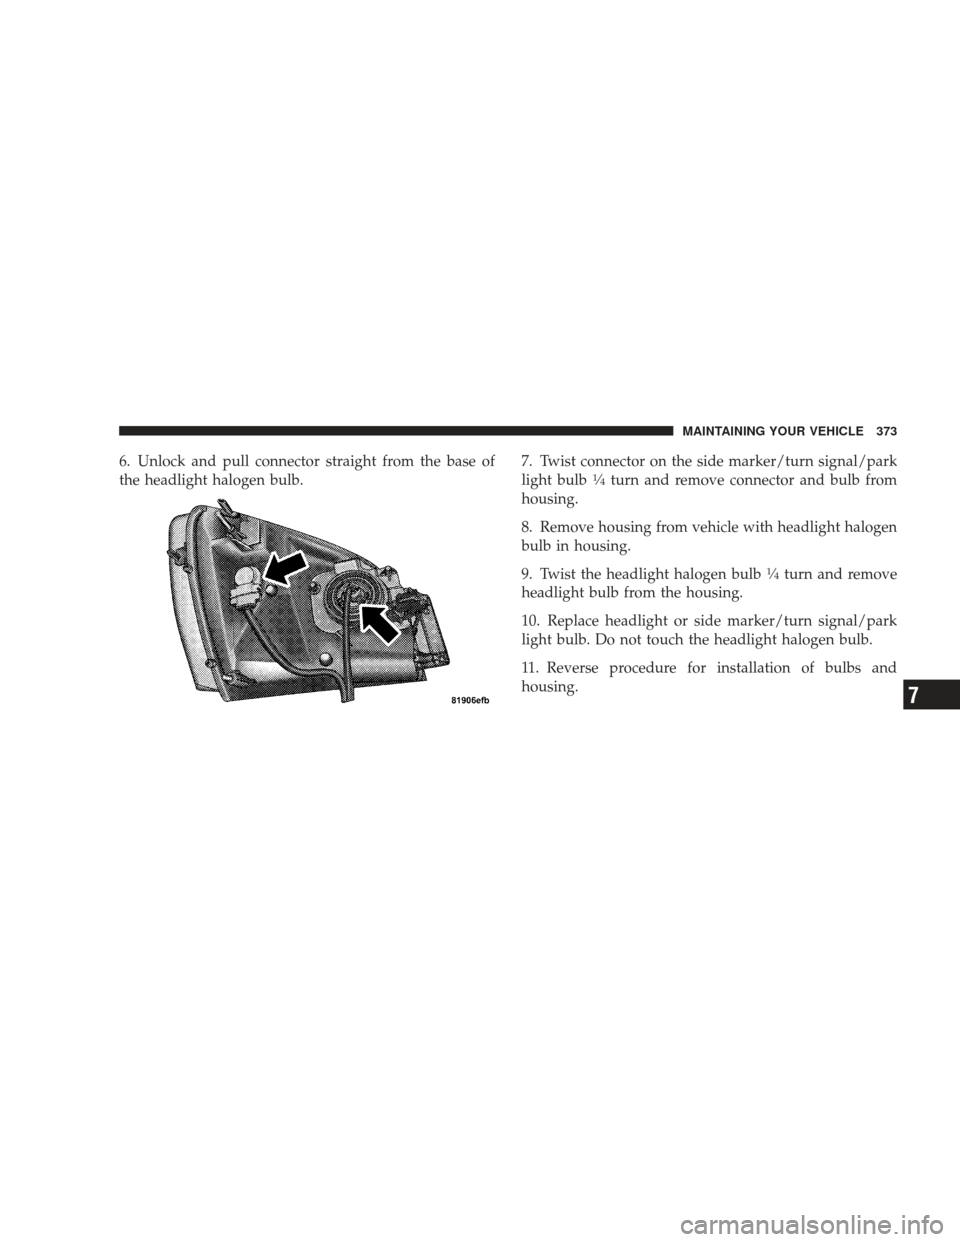 DODGE RAM 5500 CHASSIS CAB 2009 4.G Owners Manual 6. Unlock and pull connector straight from the base of
the headlight halogen bulb.7. Twist connector on the side marker/turn signal/park
light bulb1�4turn and remove connector and bulb from
housing.
8